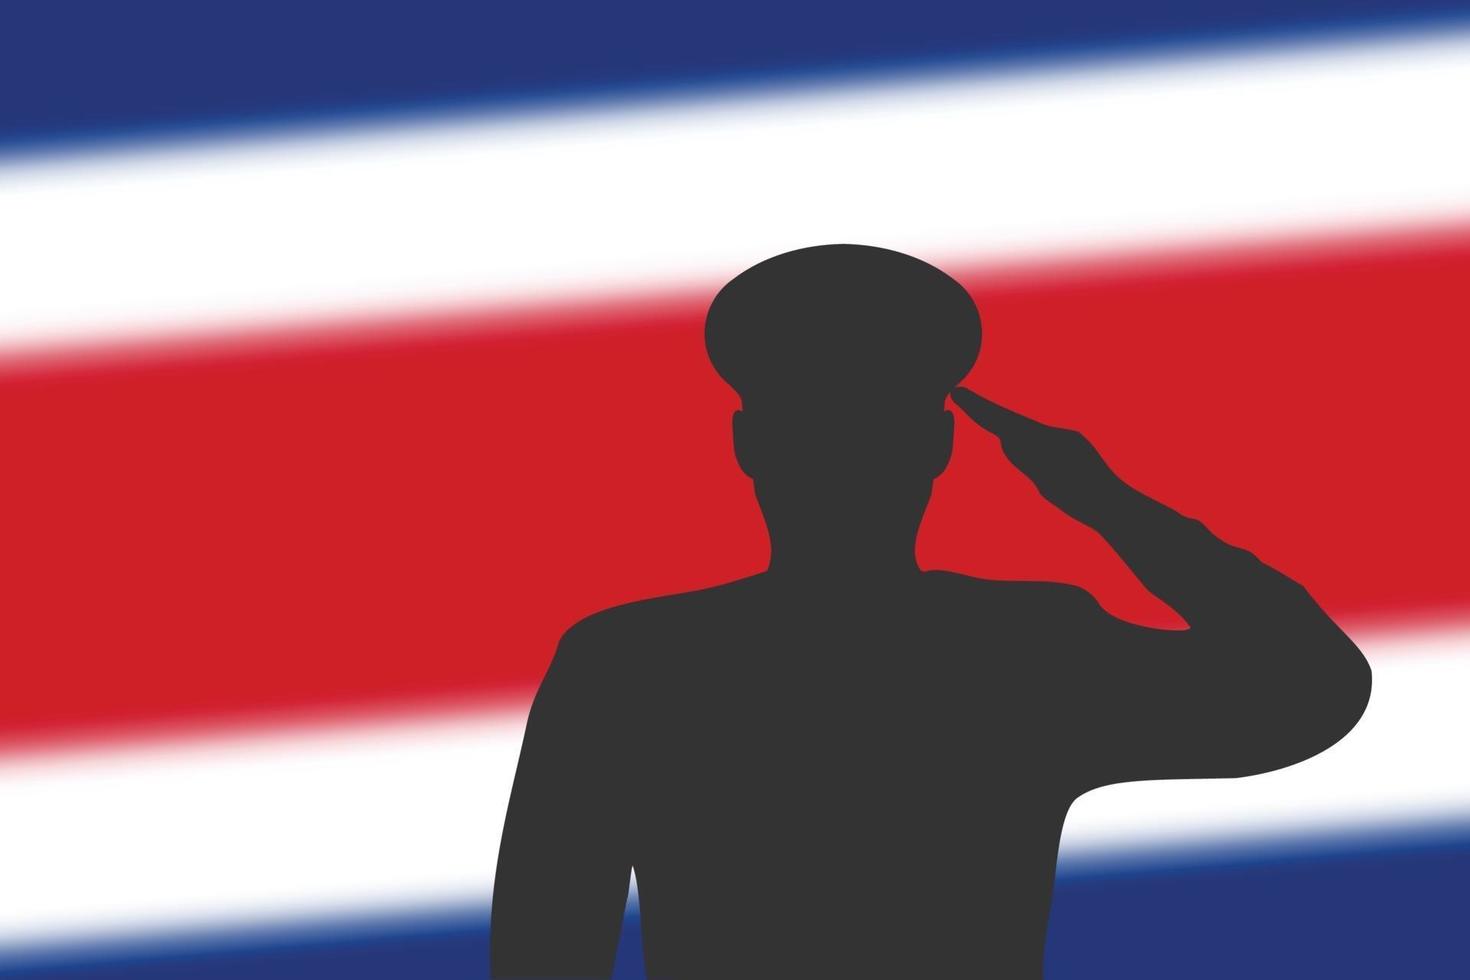 Solder silhouette on blur background with Costa Rica flag. vector